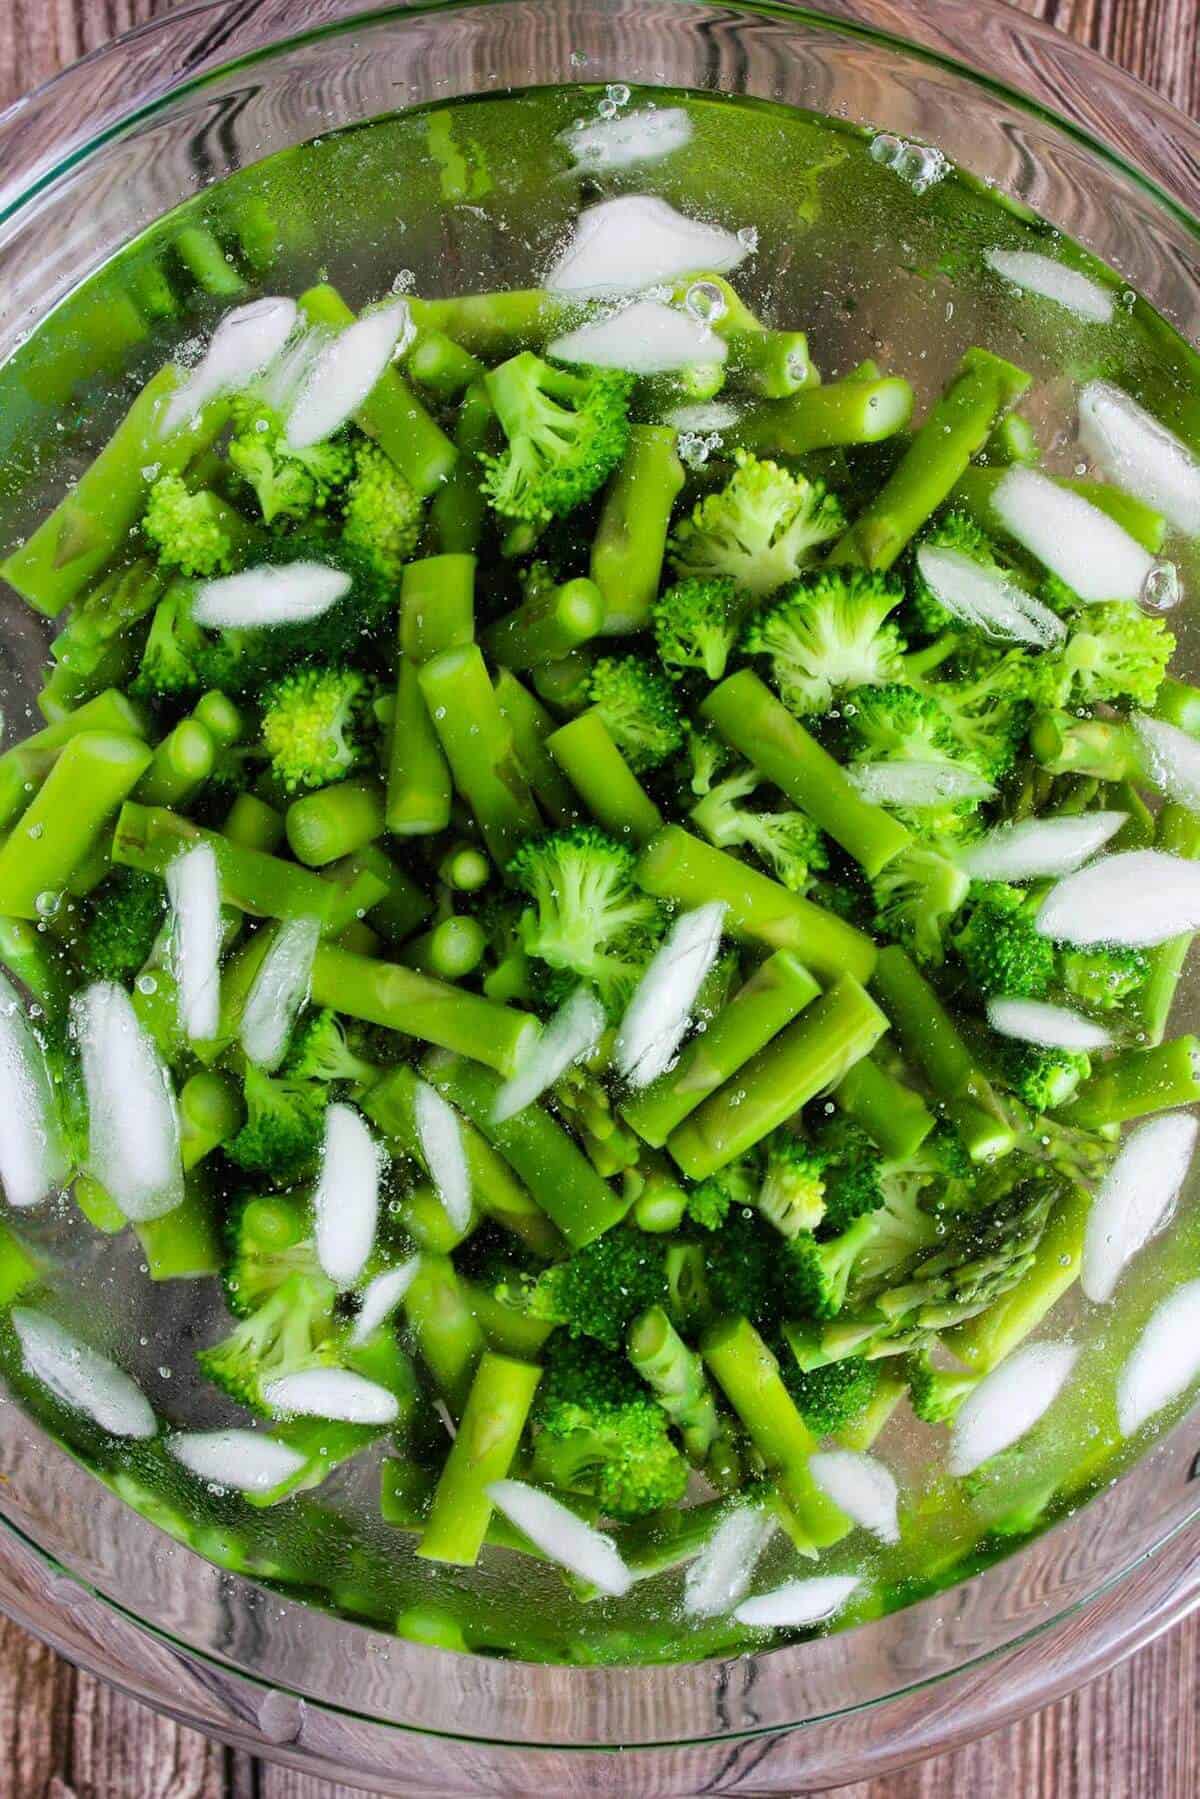 Broccoli and asparagus in a bowl of ice water.